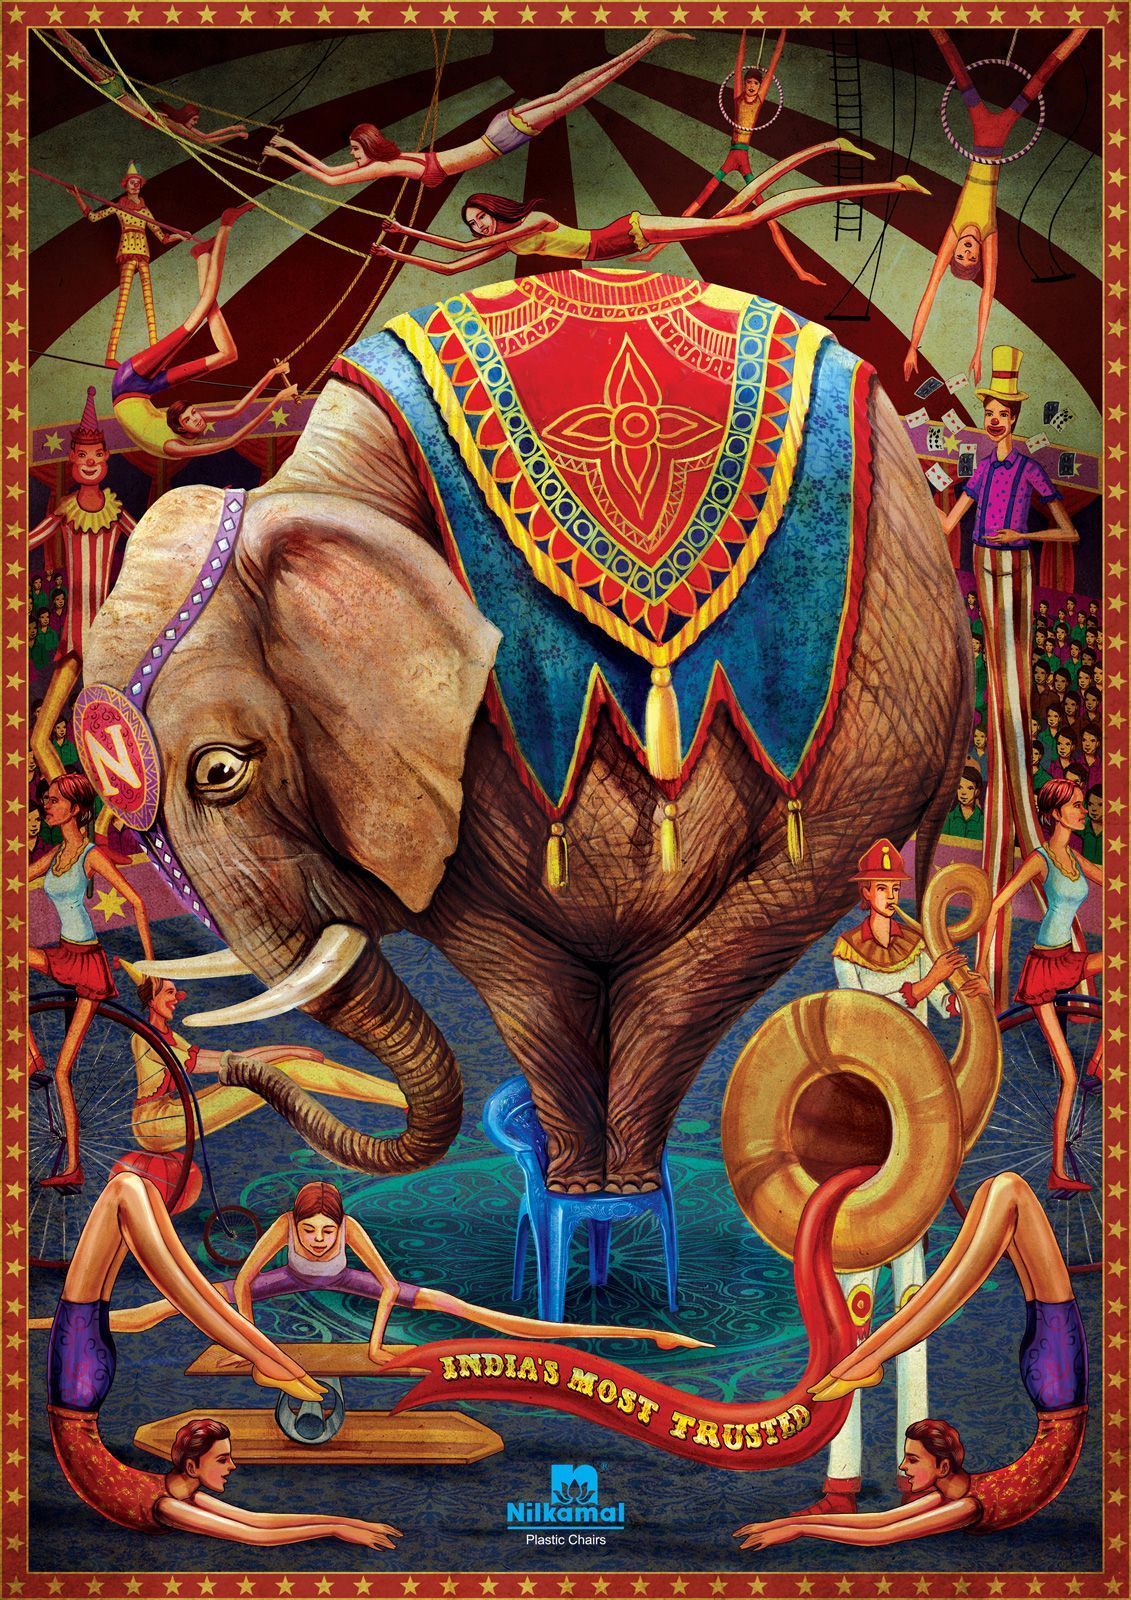 a painting of an elephant in a circus surrounded by people